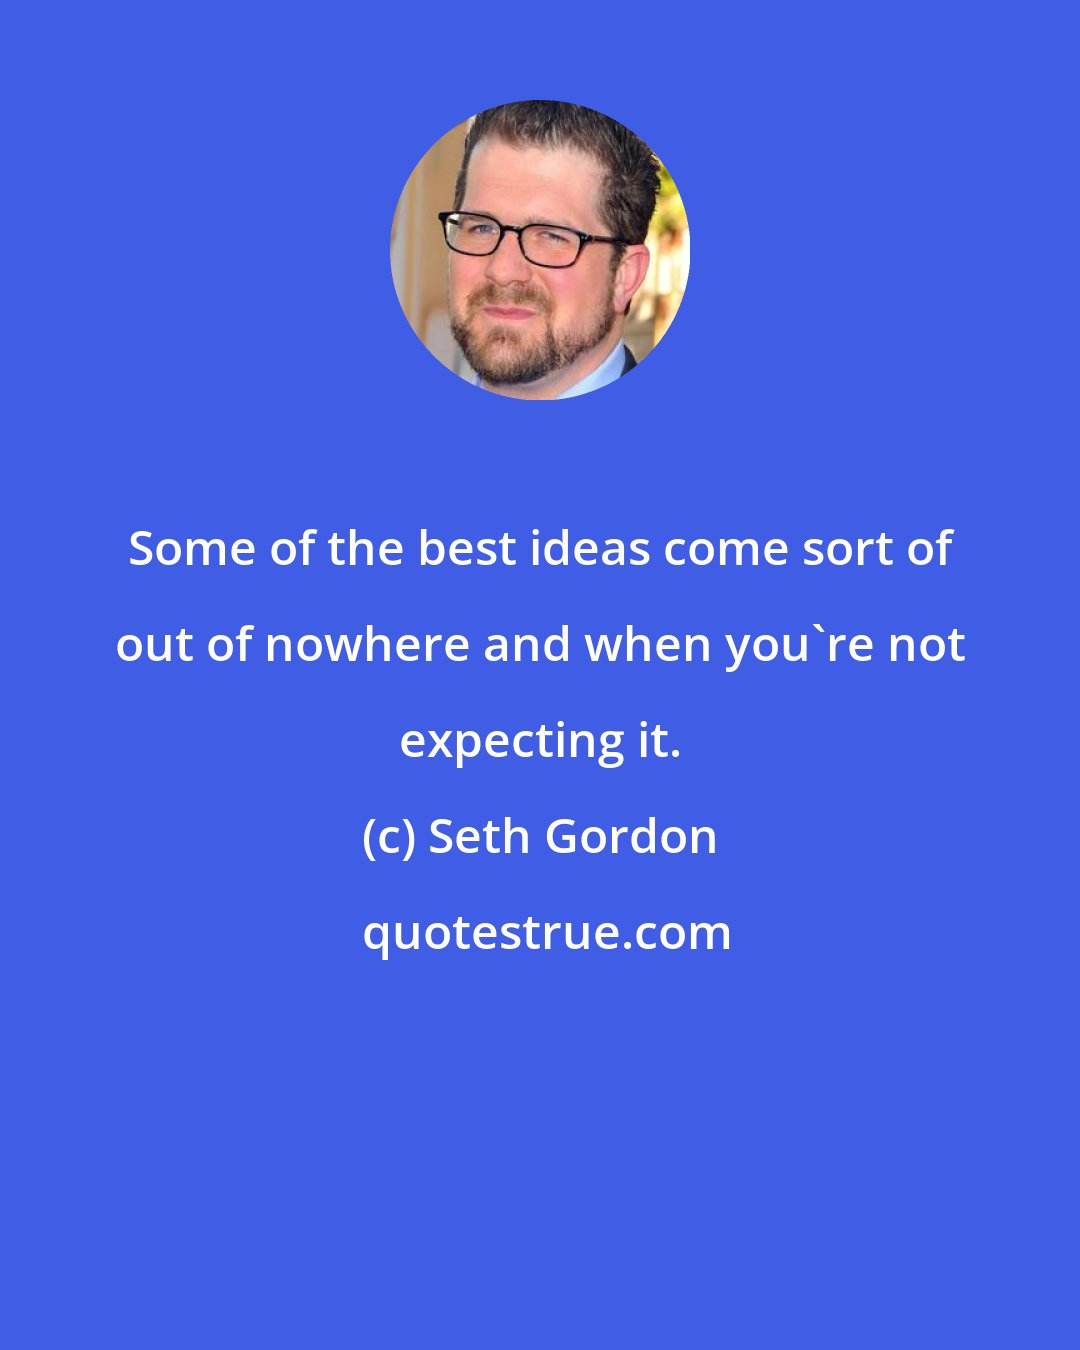 Seth Gordon: Some of the best ideas come sort of out of nowhere and when you're not expecting it.